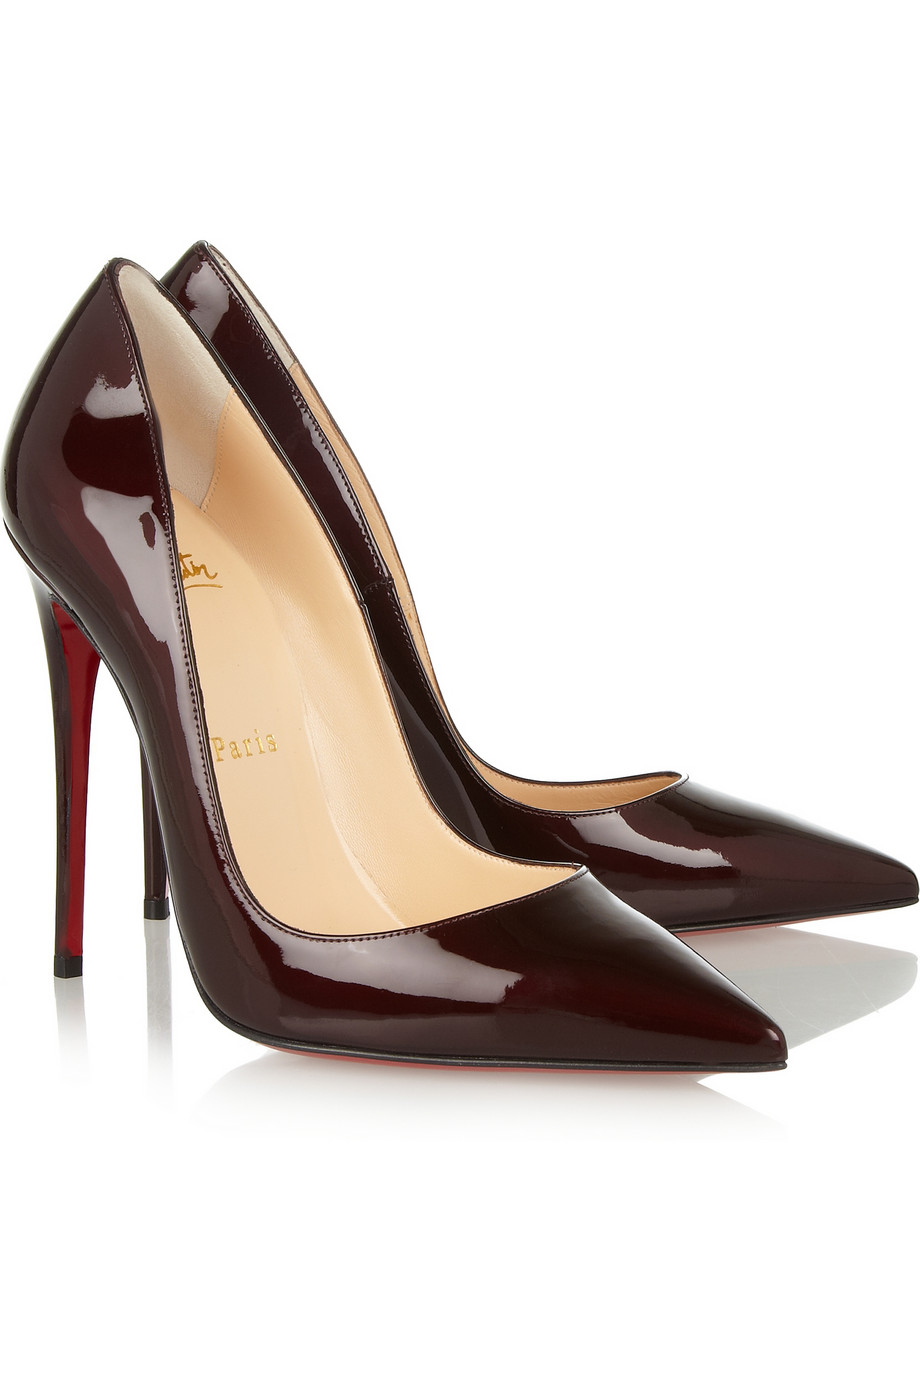 Christian Louboutin So Kate 120 Patentleather Pumps in Purple | Lyst